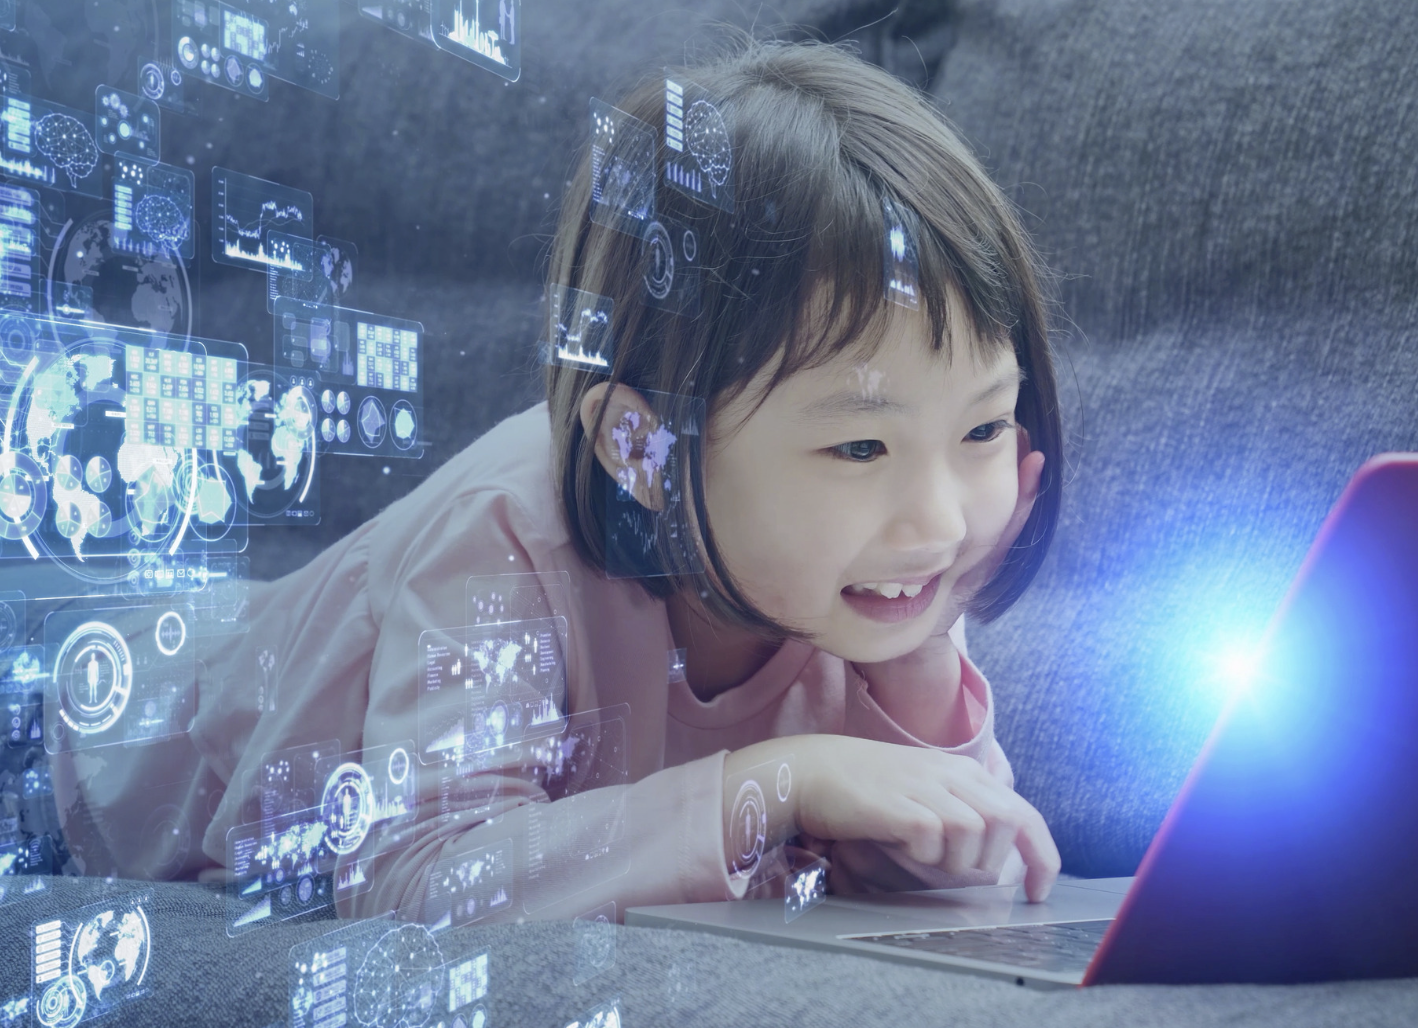 little girl on laptop with edtech symbols all around her